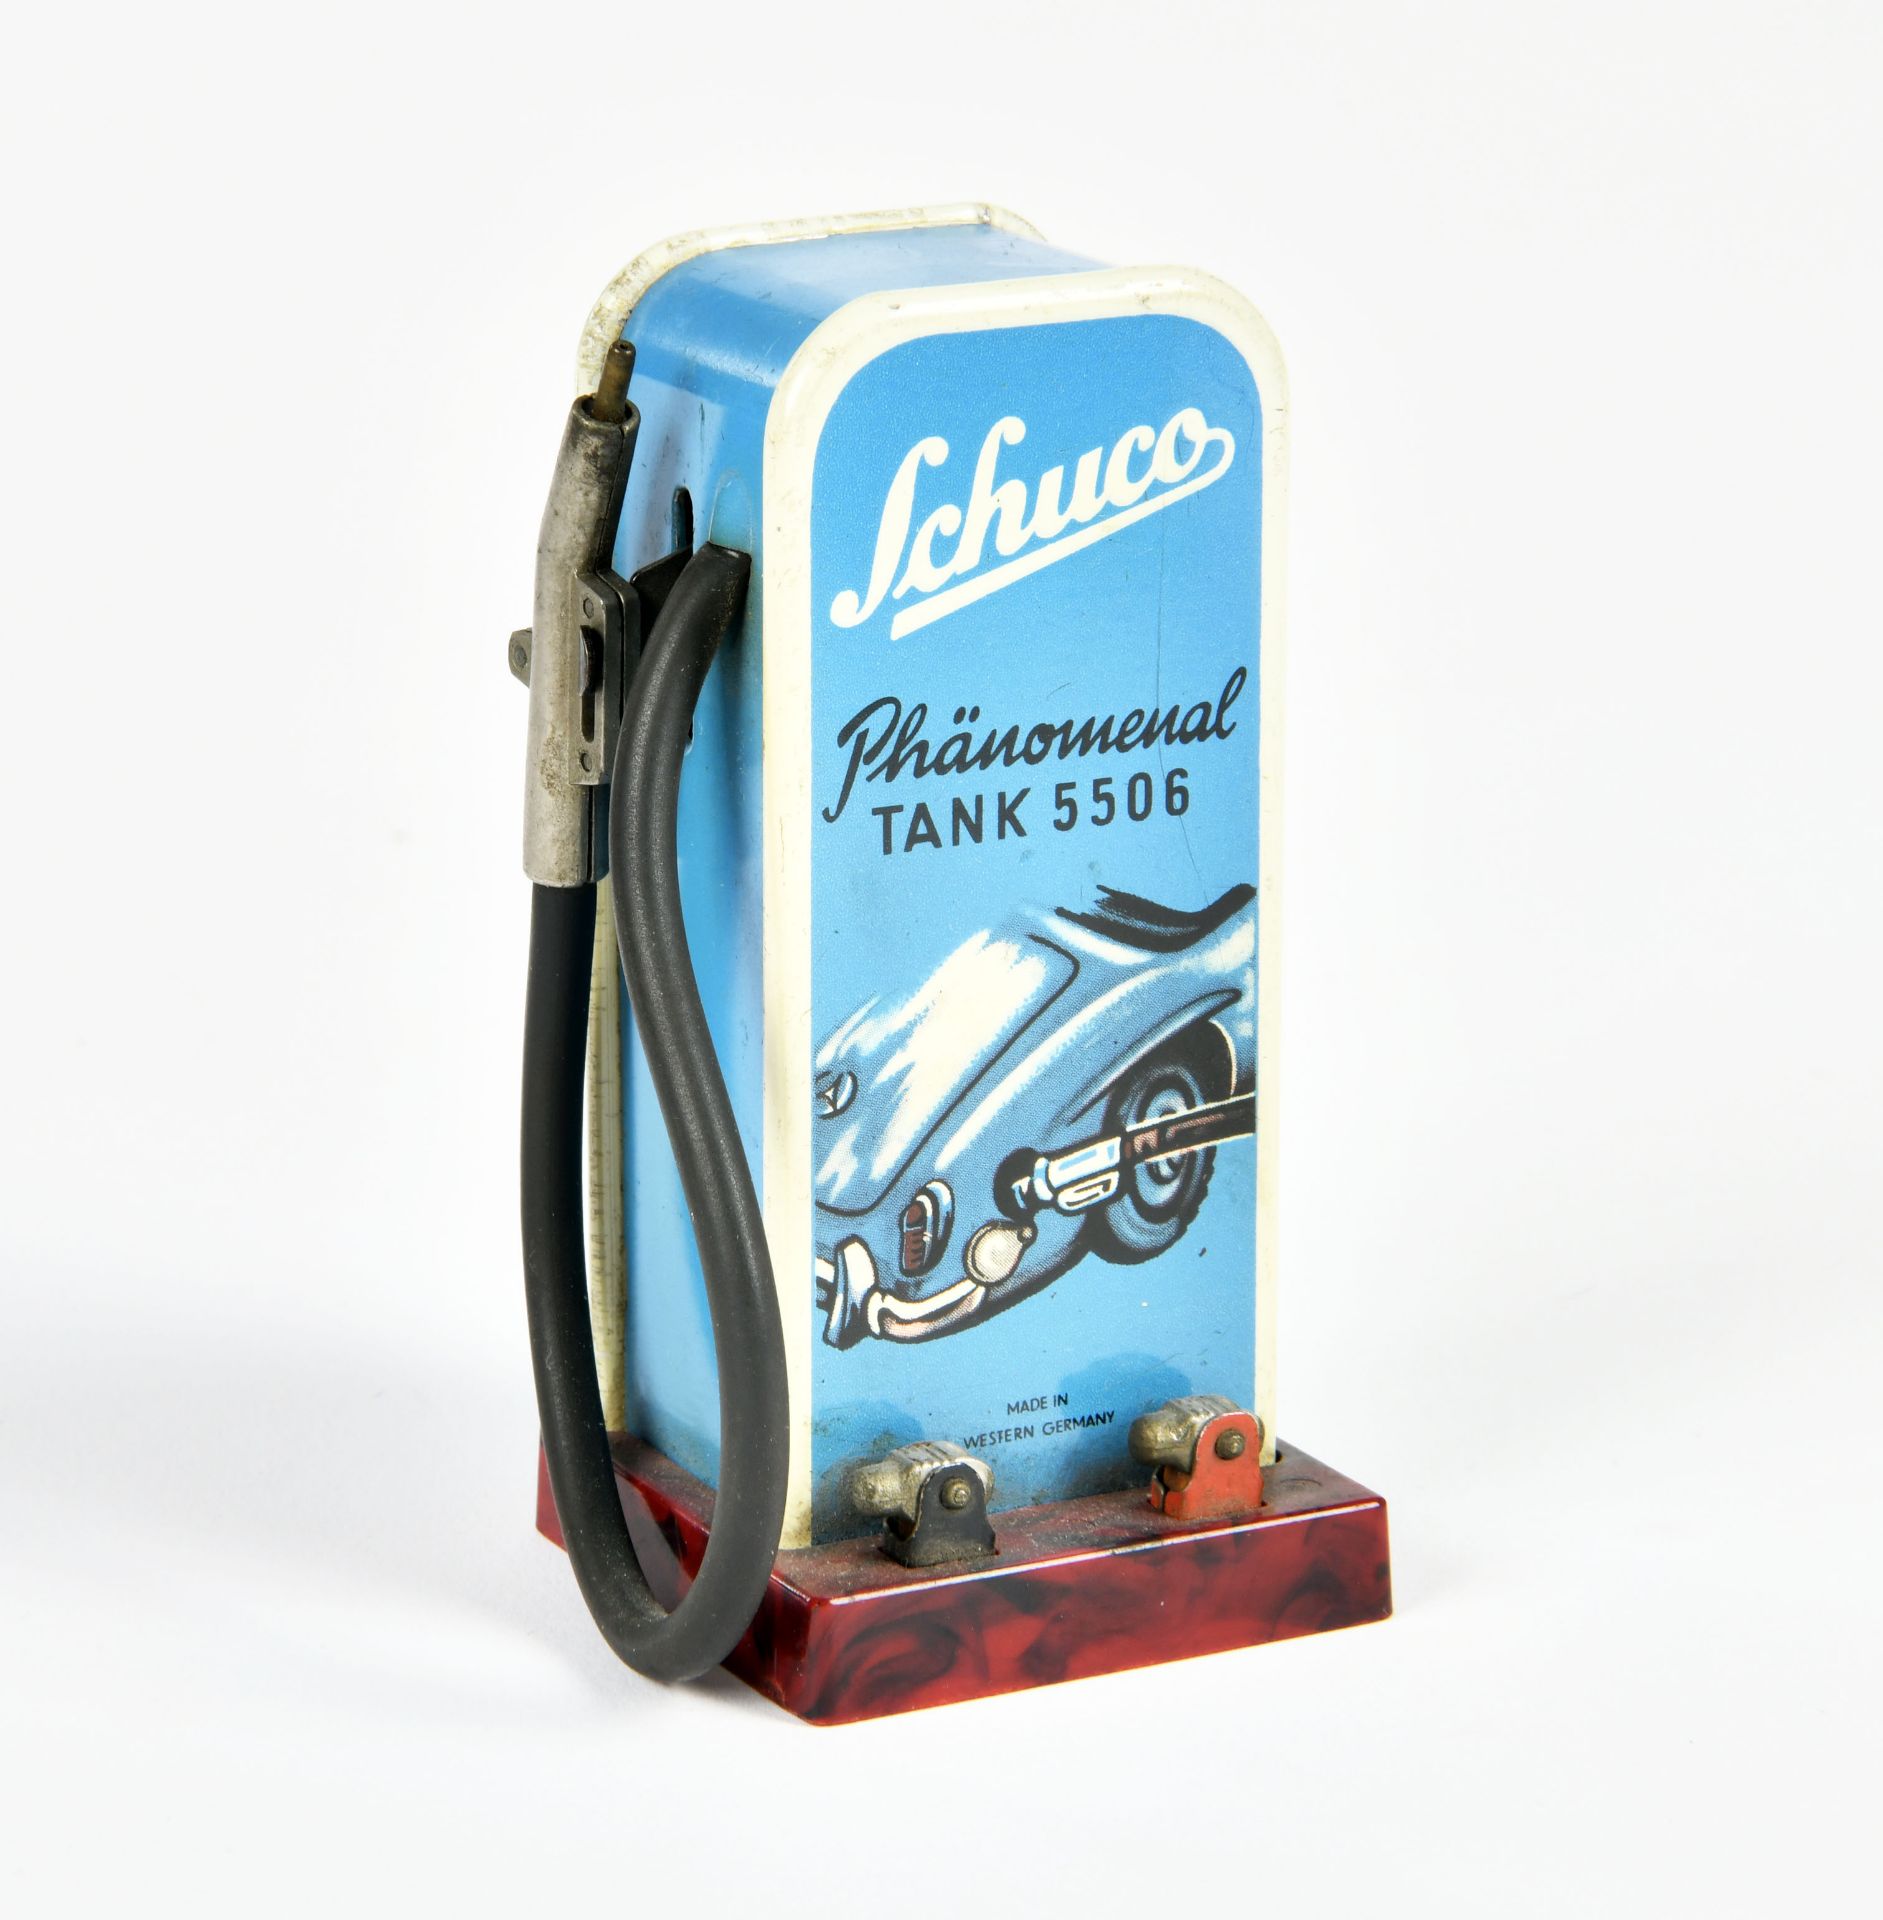 Schuco, Aral gas pump, W.-Germany, 10 cm, tin, C 1- - Image 2 of 2